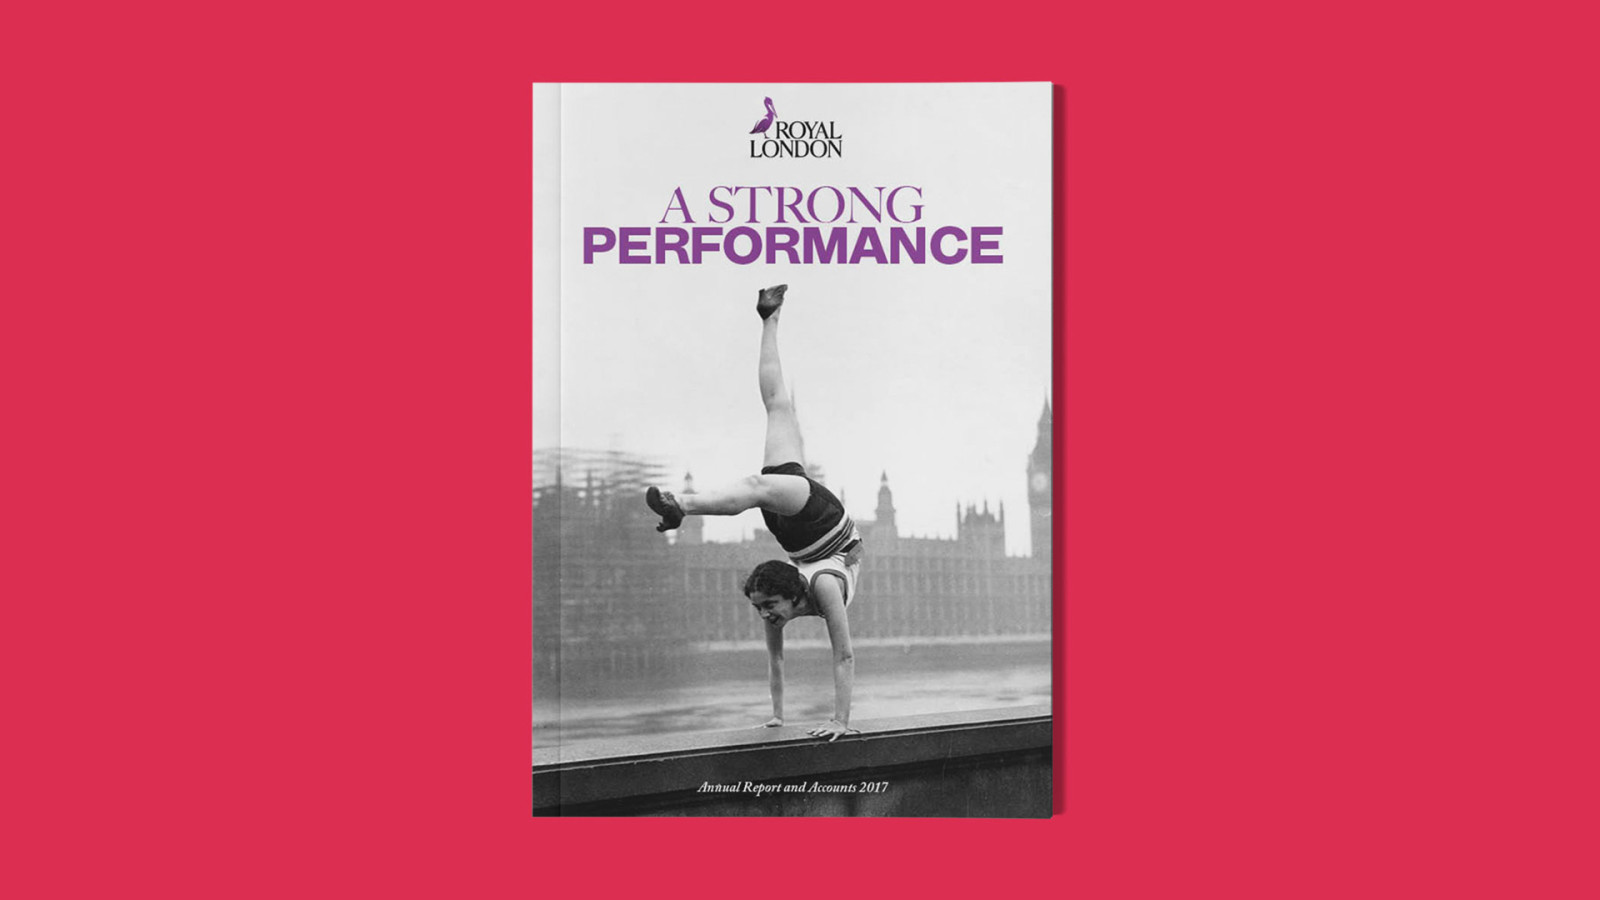 Royal London annual report cover: A strong performance